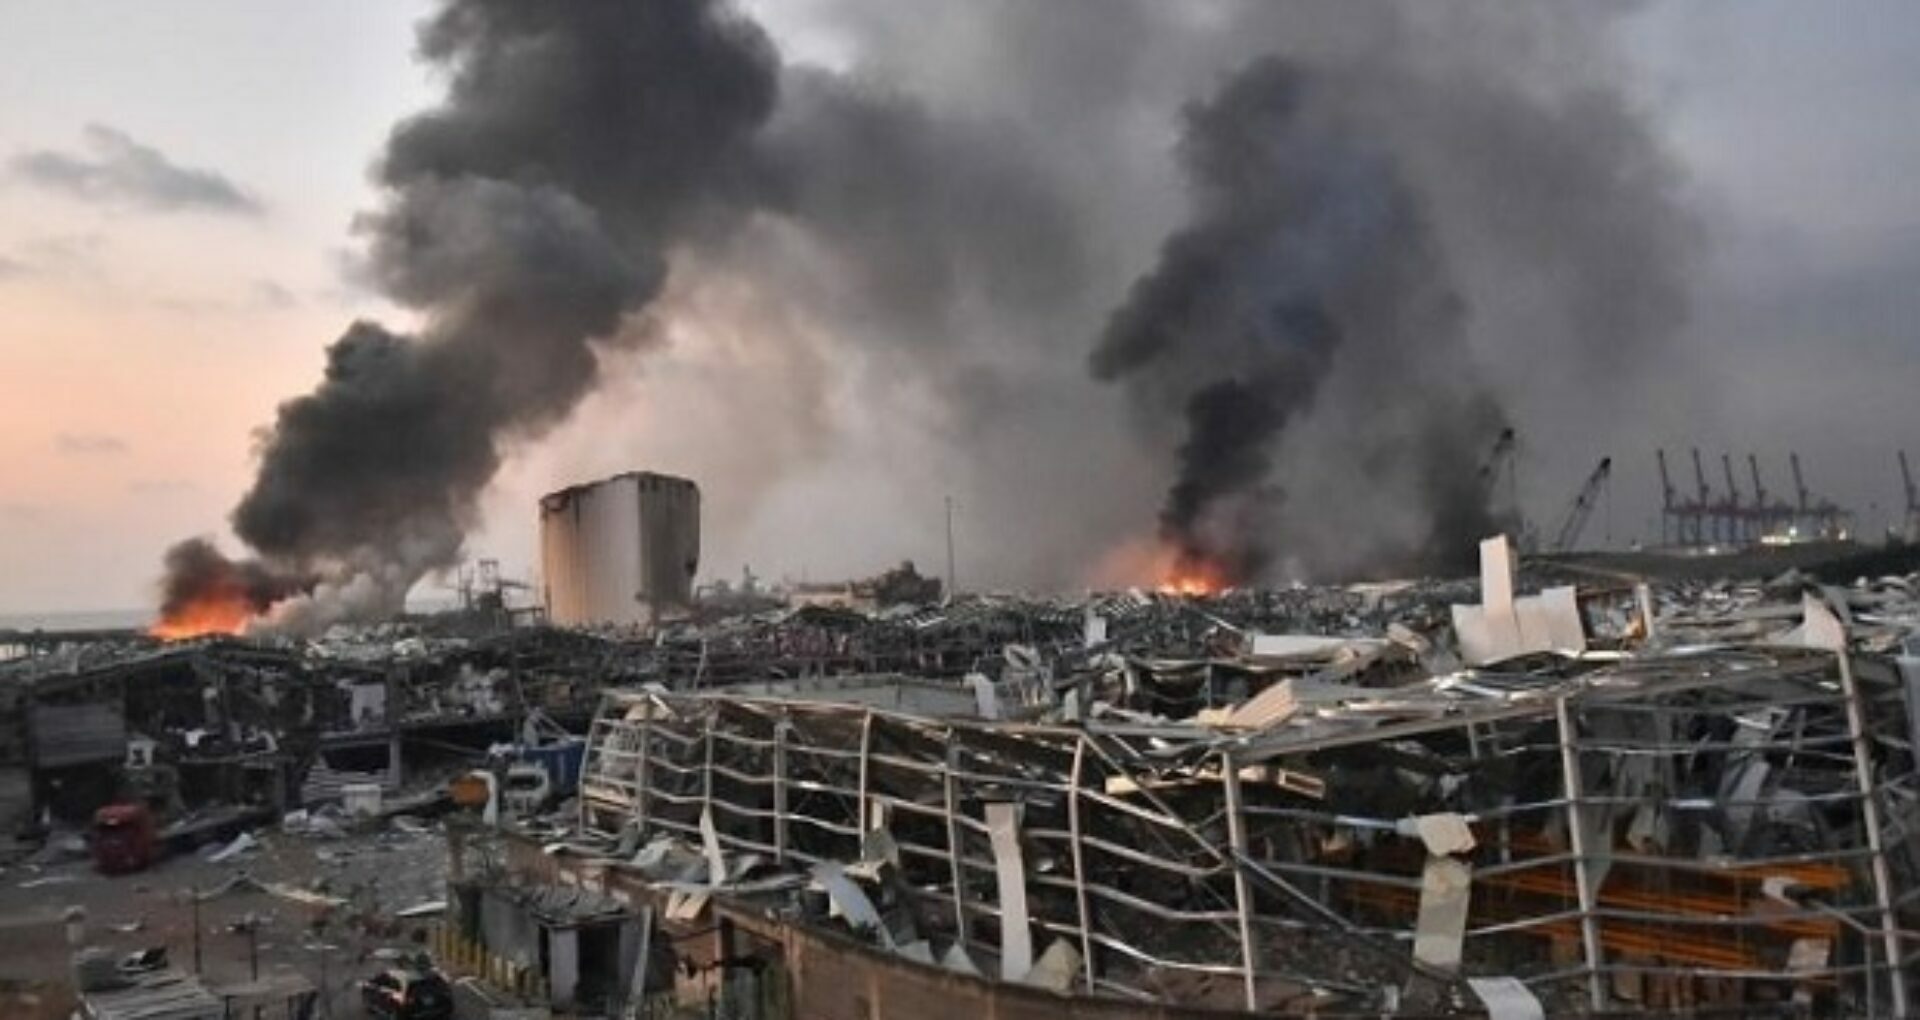 The European Commission Adds €30 Million to the Emergency Aid Offered to Lebanon Following the Blast in Beirut